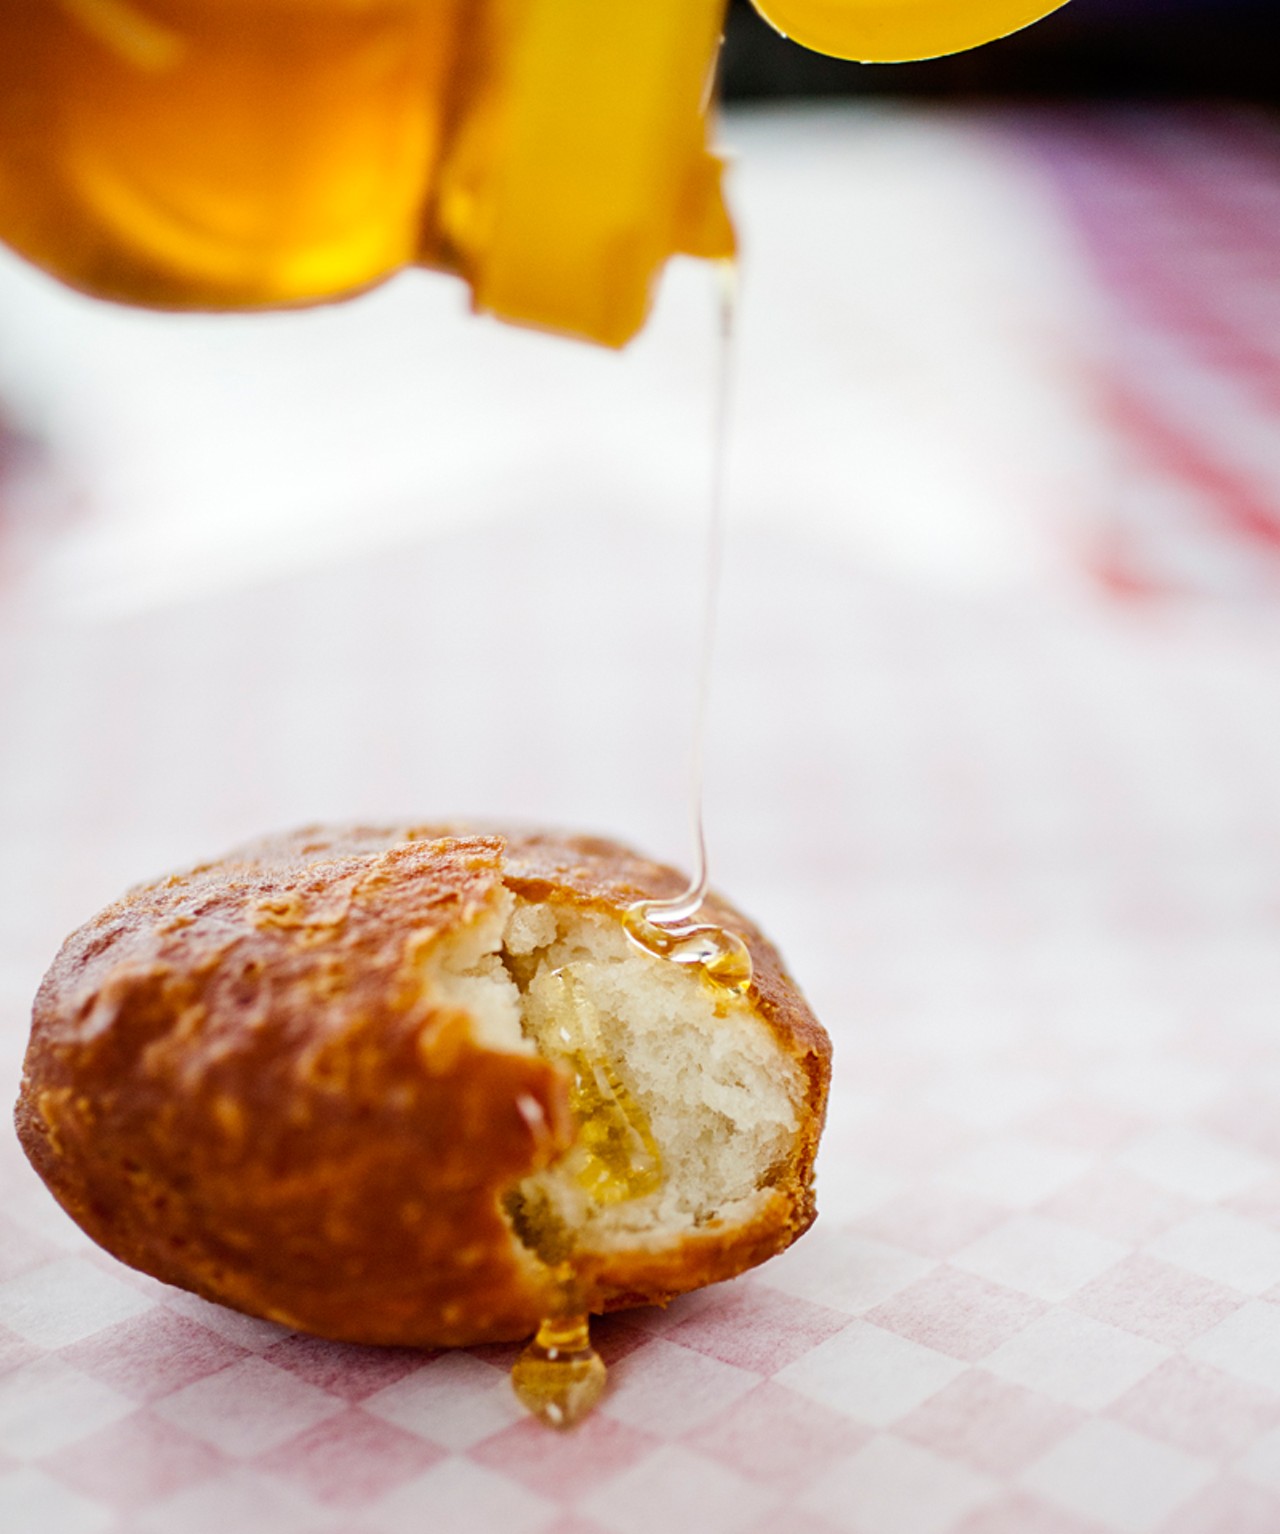 On the sweet side, try a fried biscuit with honey for a treat.